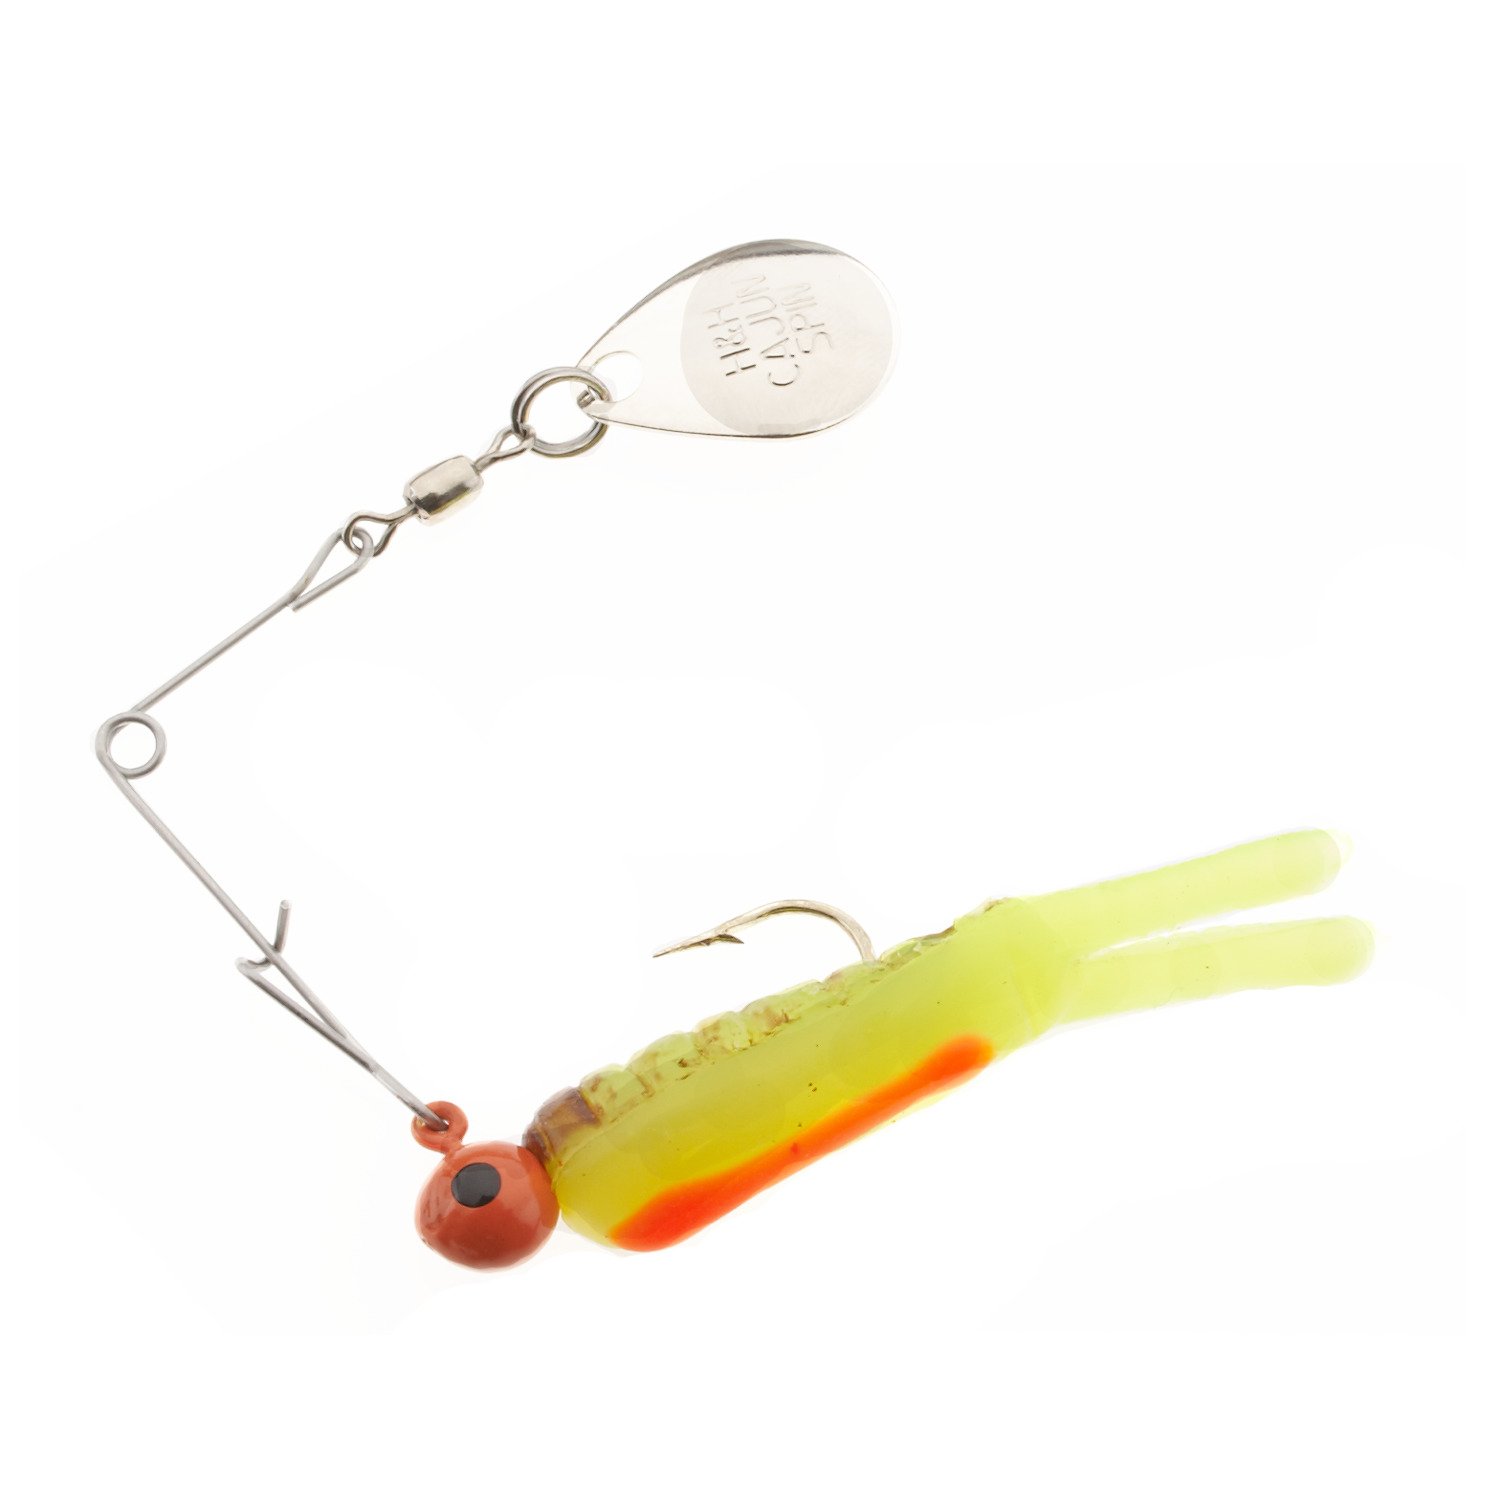 Academy Sports + Outdoors H&H Lure Pro Cajun 1/16 oz Spinnerbait